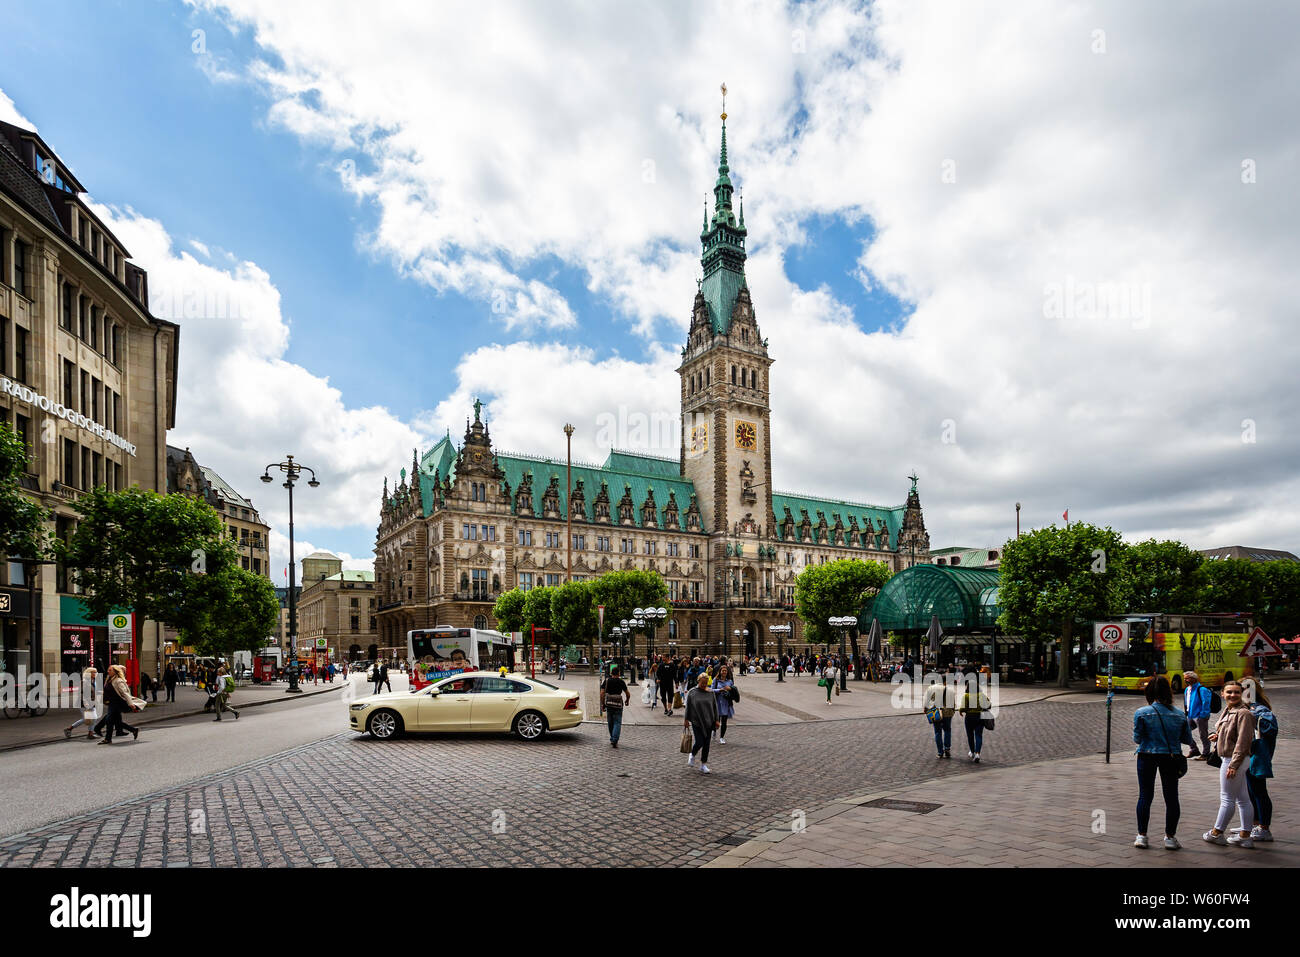 Neo Renaissance Town Hall or Rathaus in Hamburg, Germany on 16 July 2019 Stock Photo